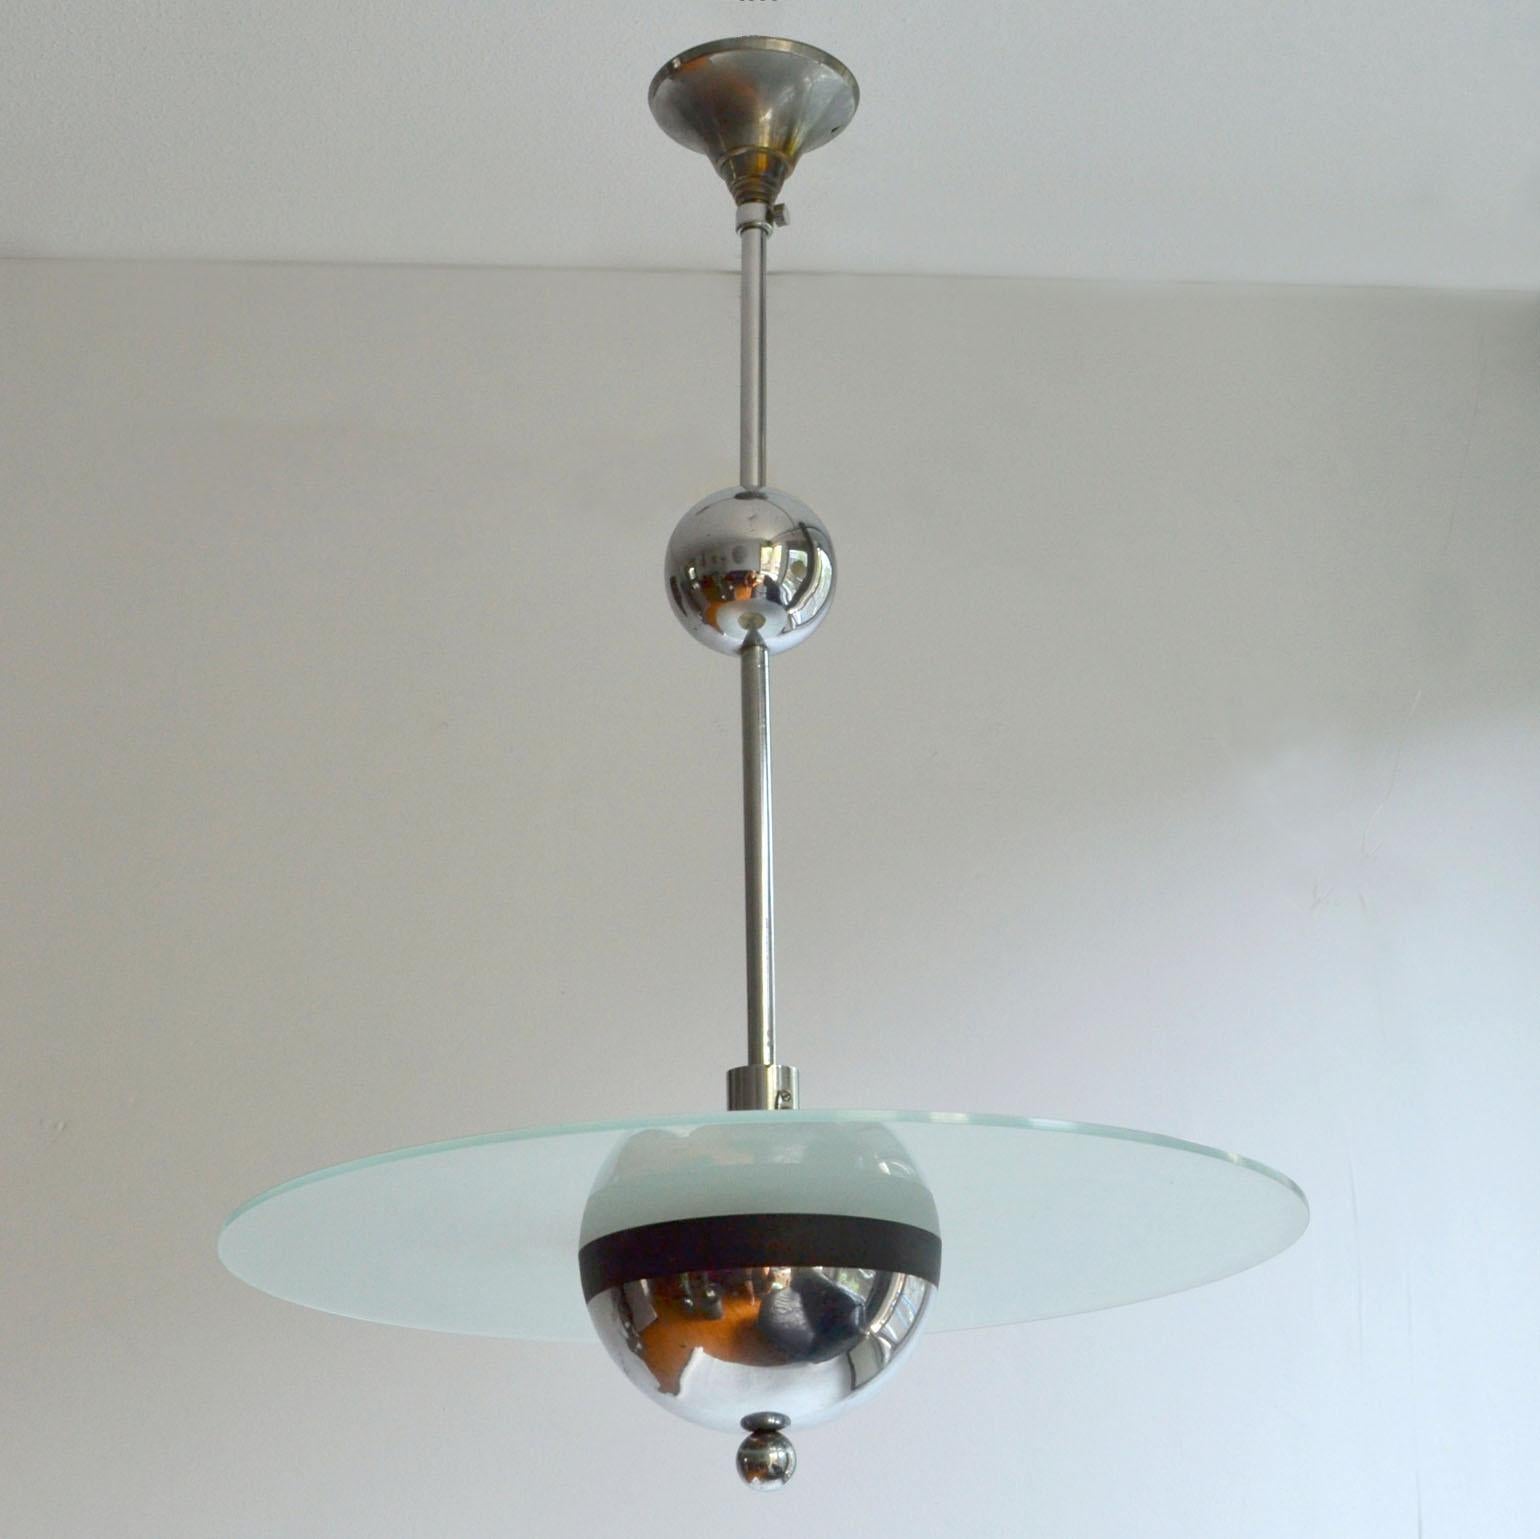 Art Deco Modernist Chrome and Glass Pendant in the Style of Gispen 1930s For Sale